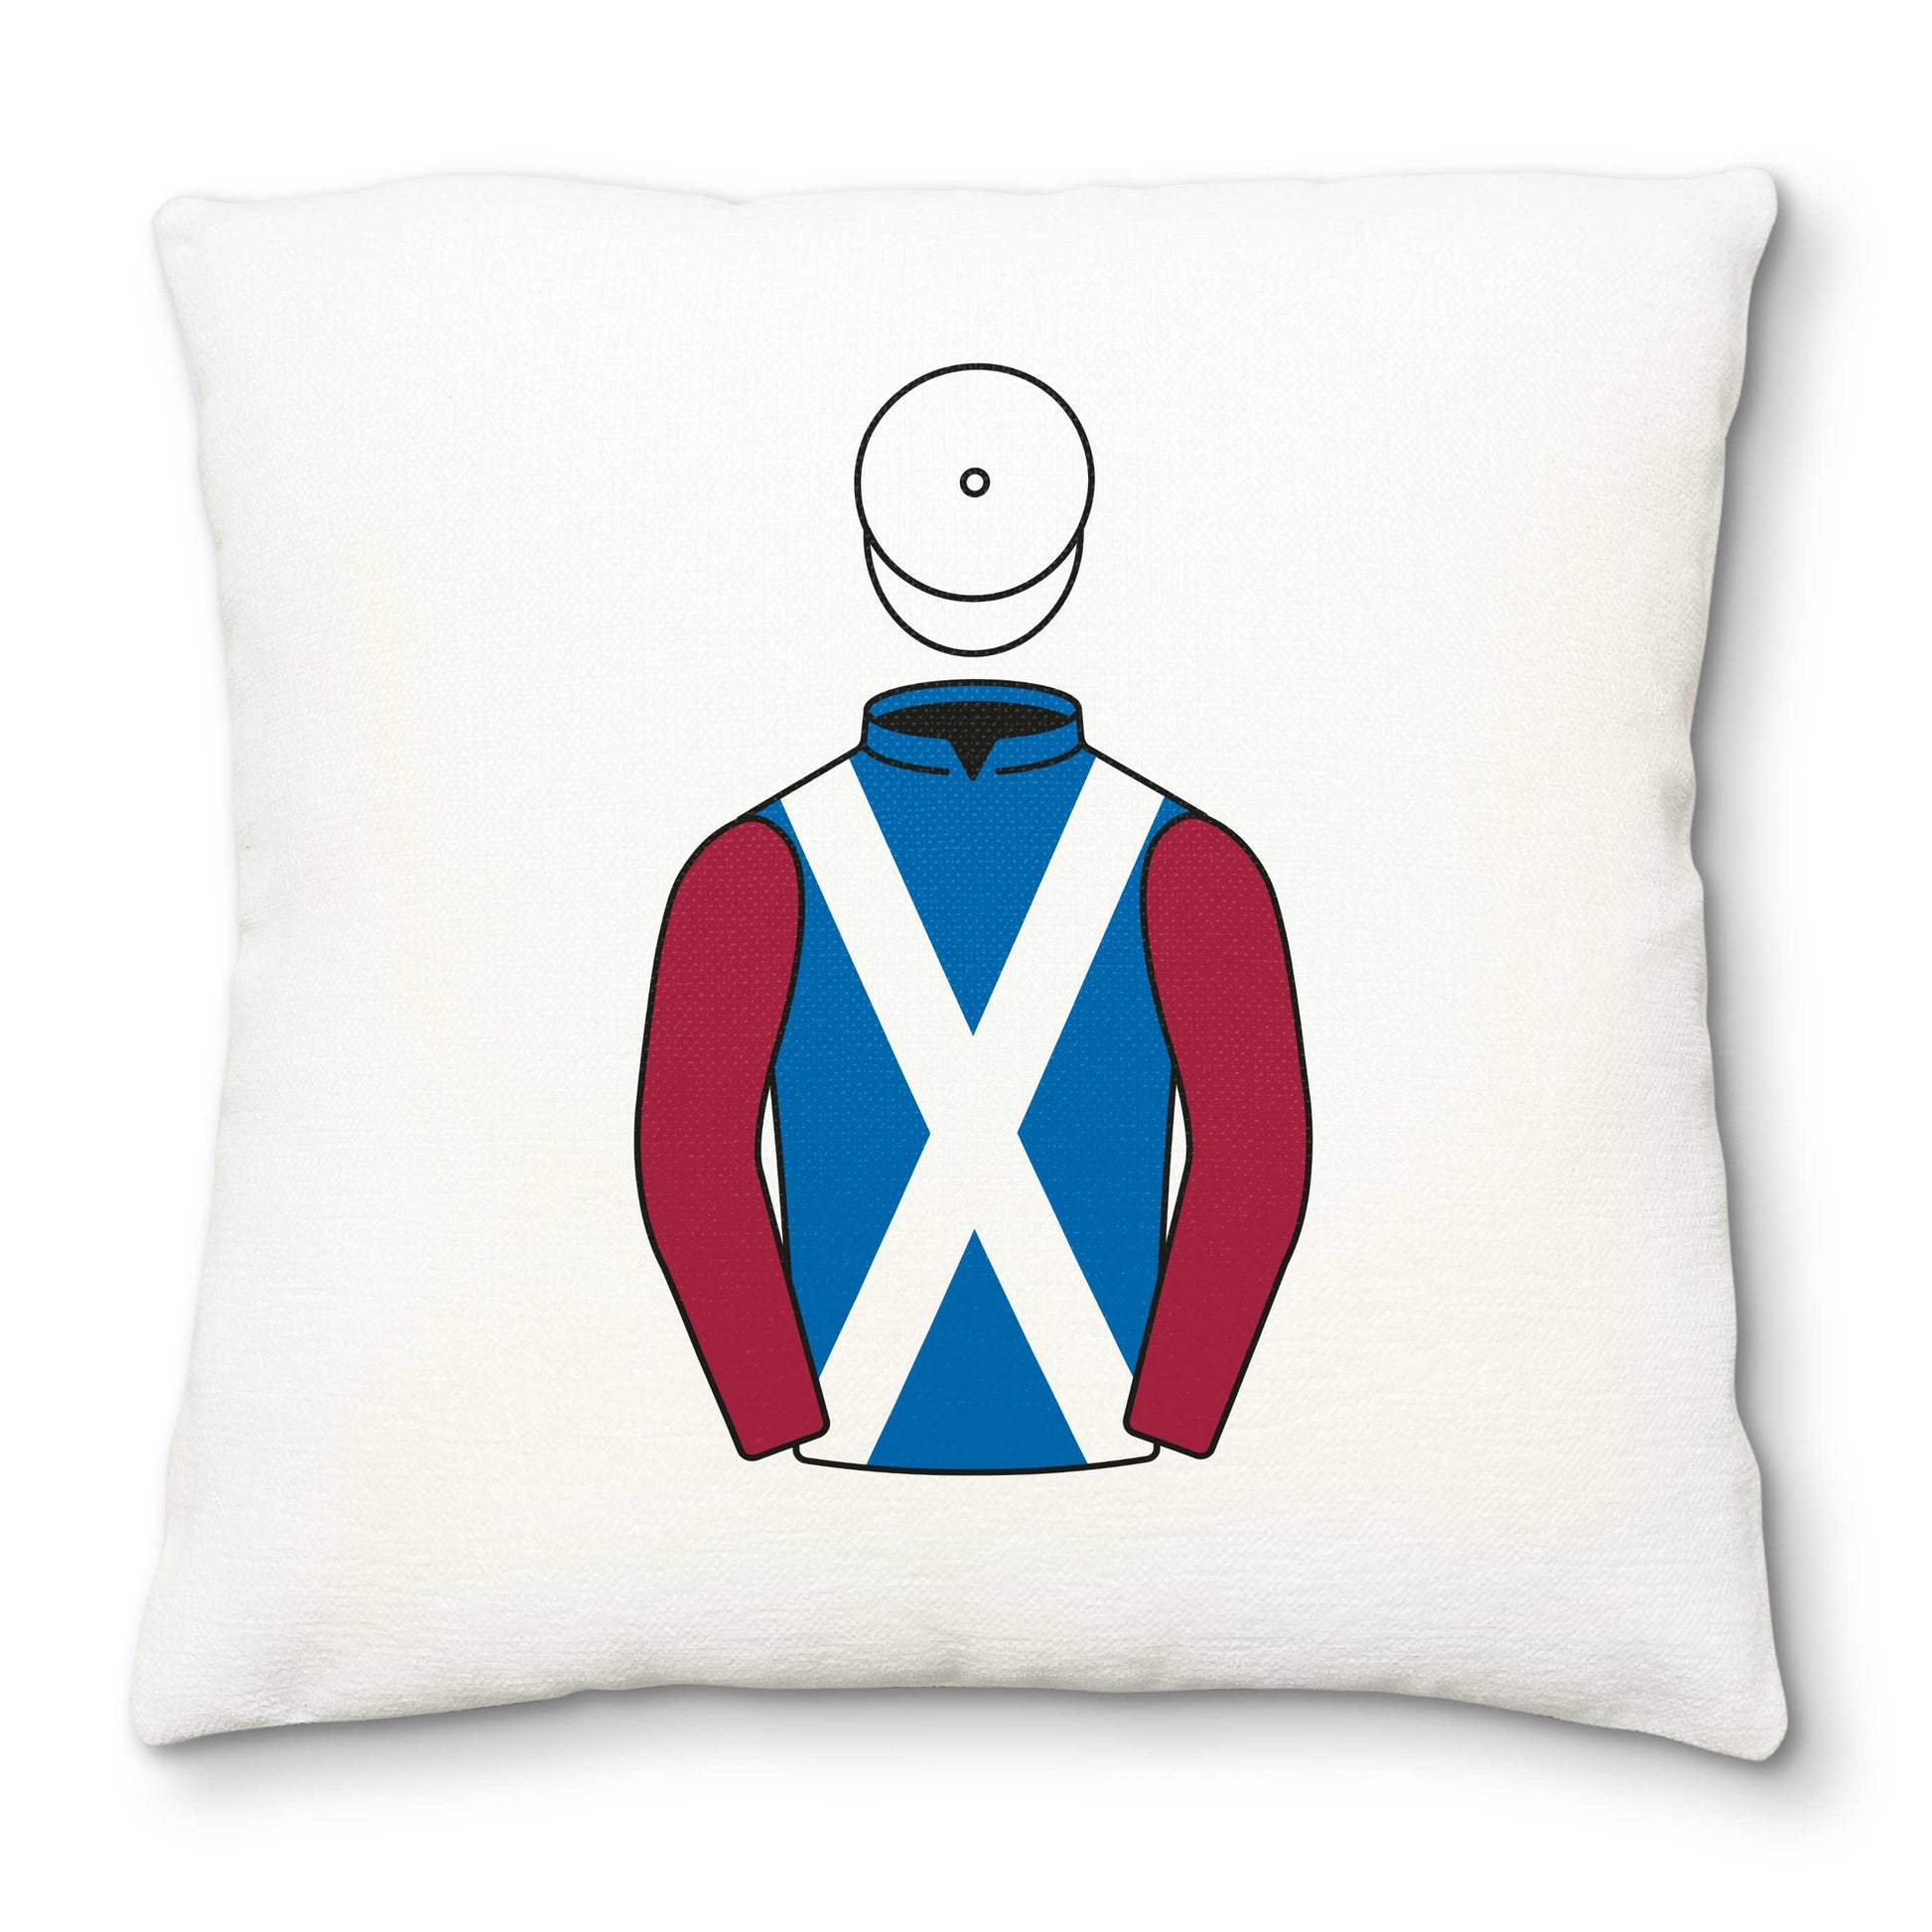 Two Golf Widows Deluxe Cushion Cover - Hacked Up